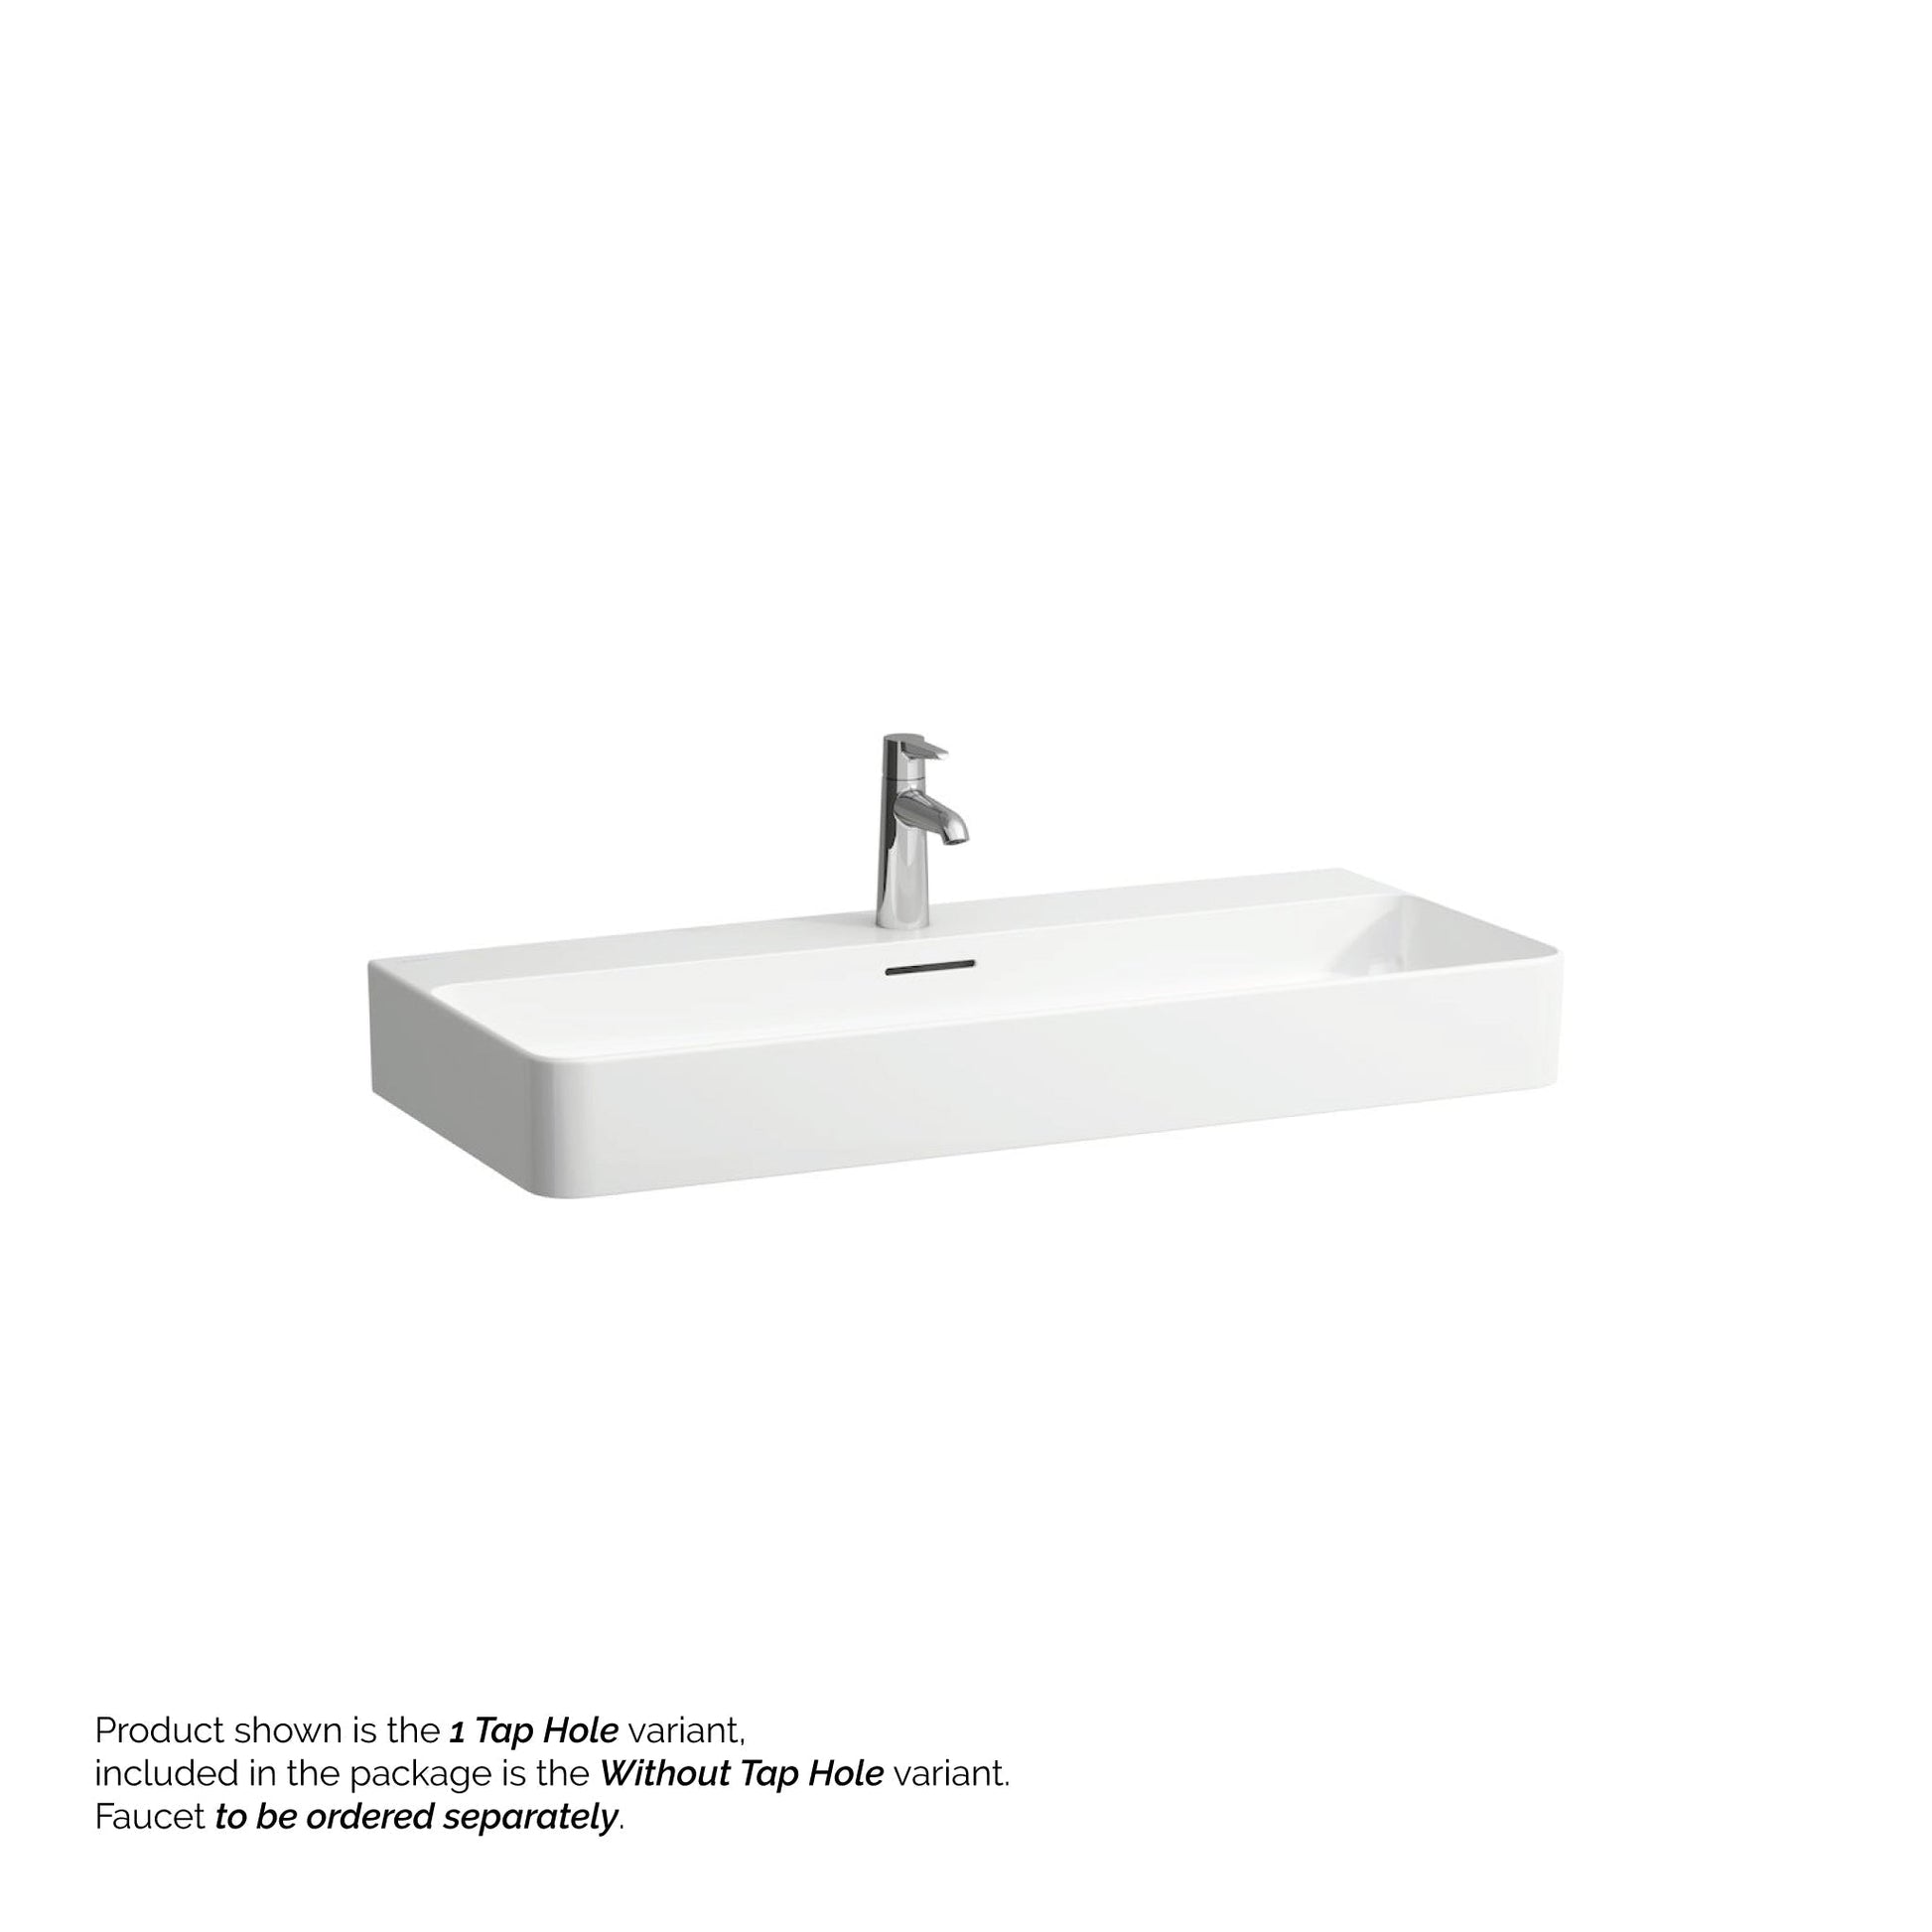 Laufen Val 37" x 17" White Ceramic Wall-Mounted Bathroom Sink Without Faucet Hole